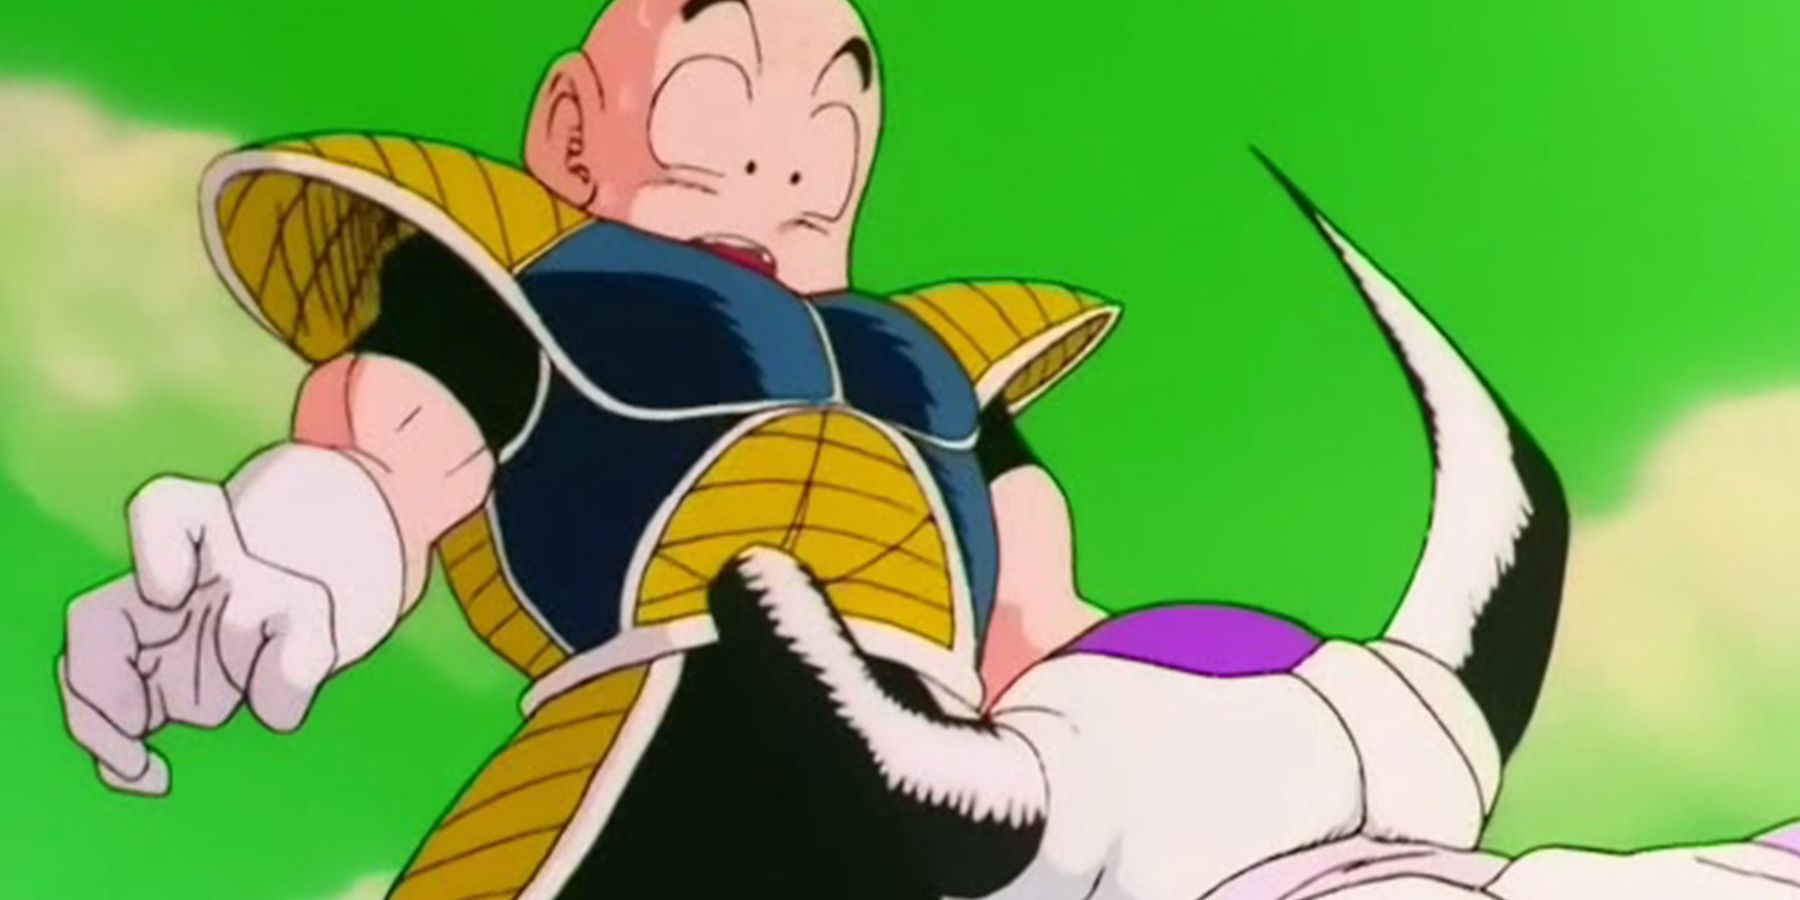 Frieza gores Krillin with his horns in Dragon Ball Z